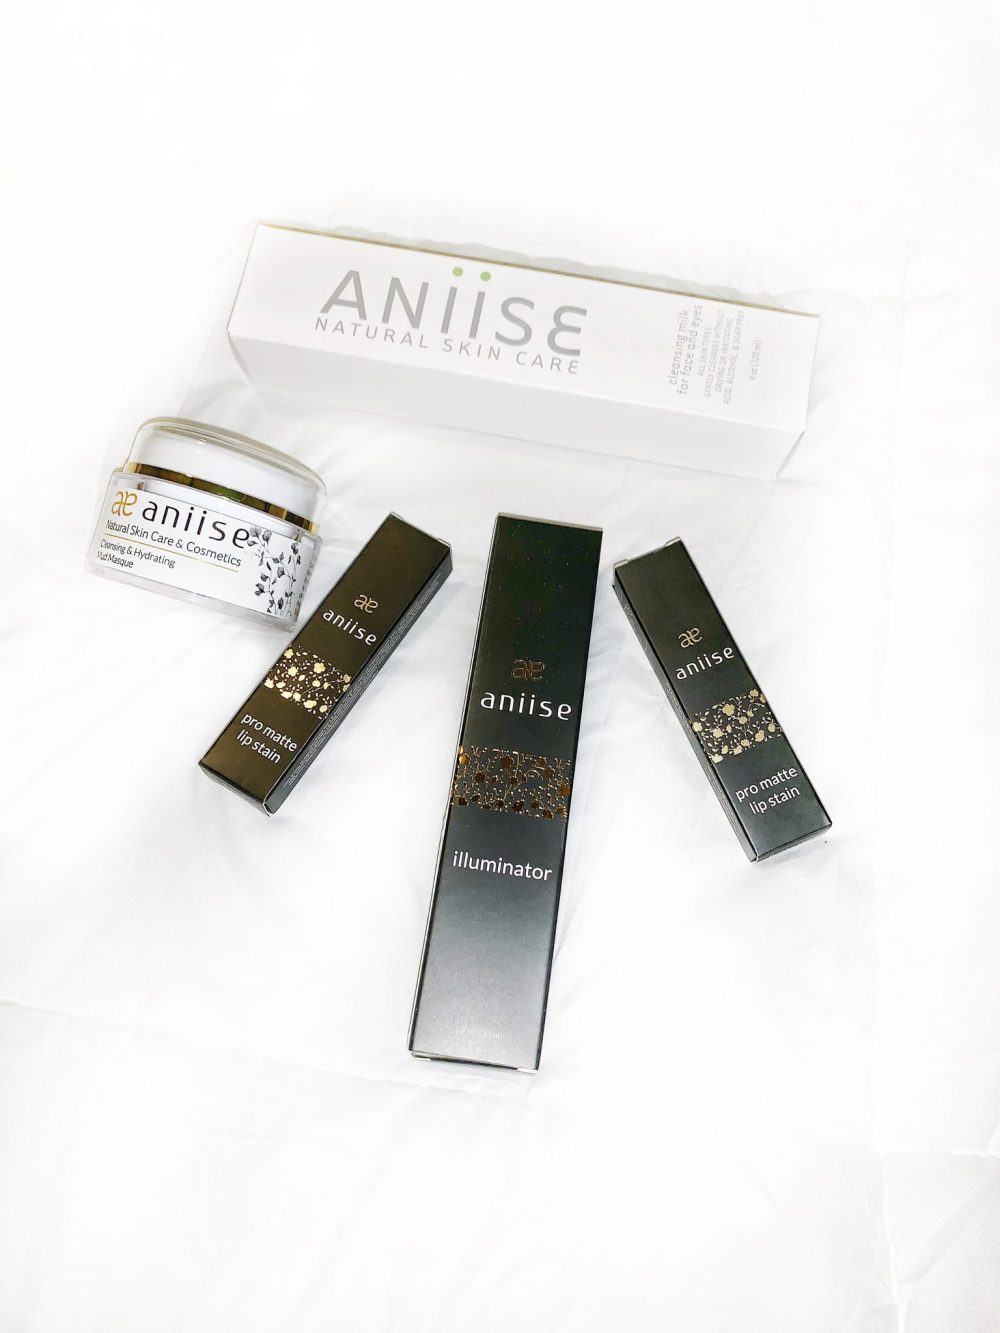 Aniise Beauty and Skincare Giveaway!